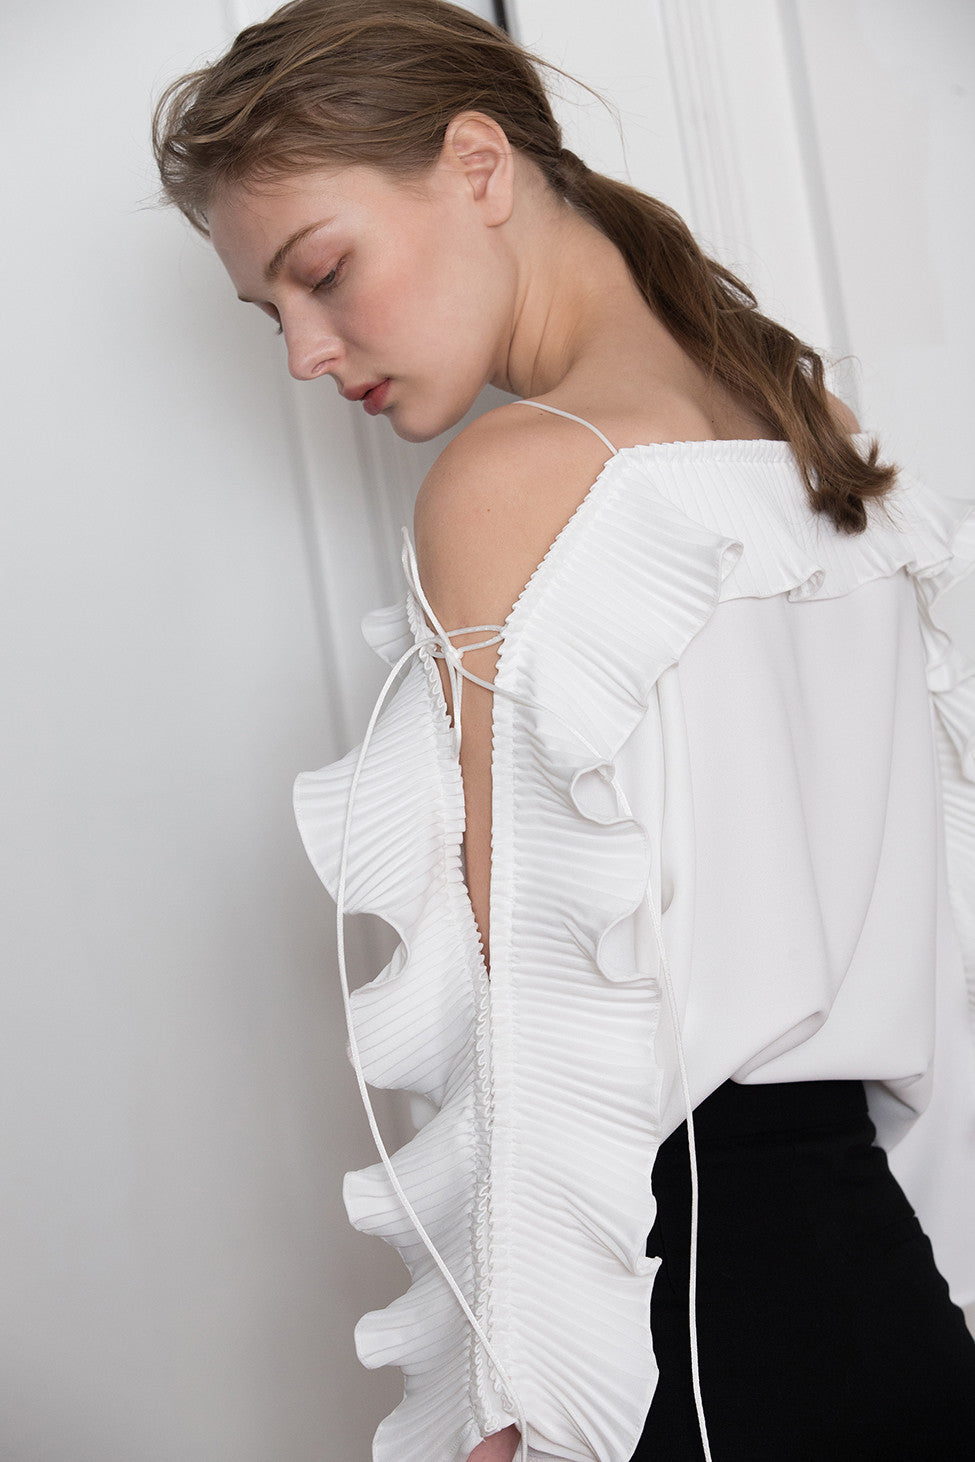 The Calin Top in White featuring thin straps, square neckline, dimple sleeves in ruffle detailing with self-tie. Pull on.